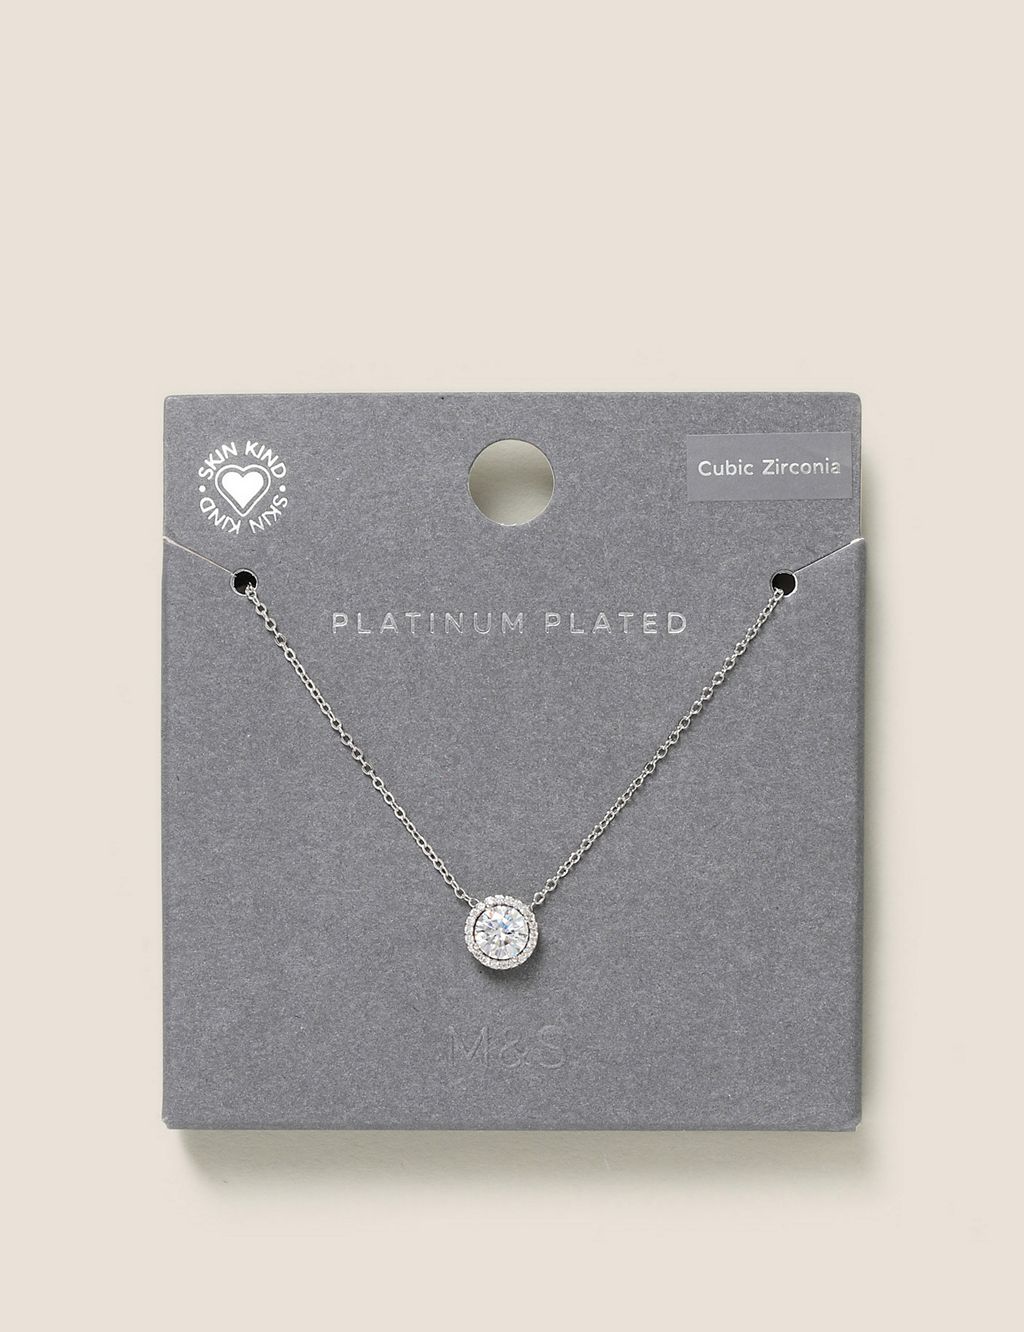 Platinum Plated Cubic Zirconia Necklace 1 of 3